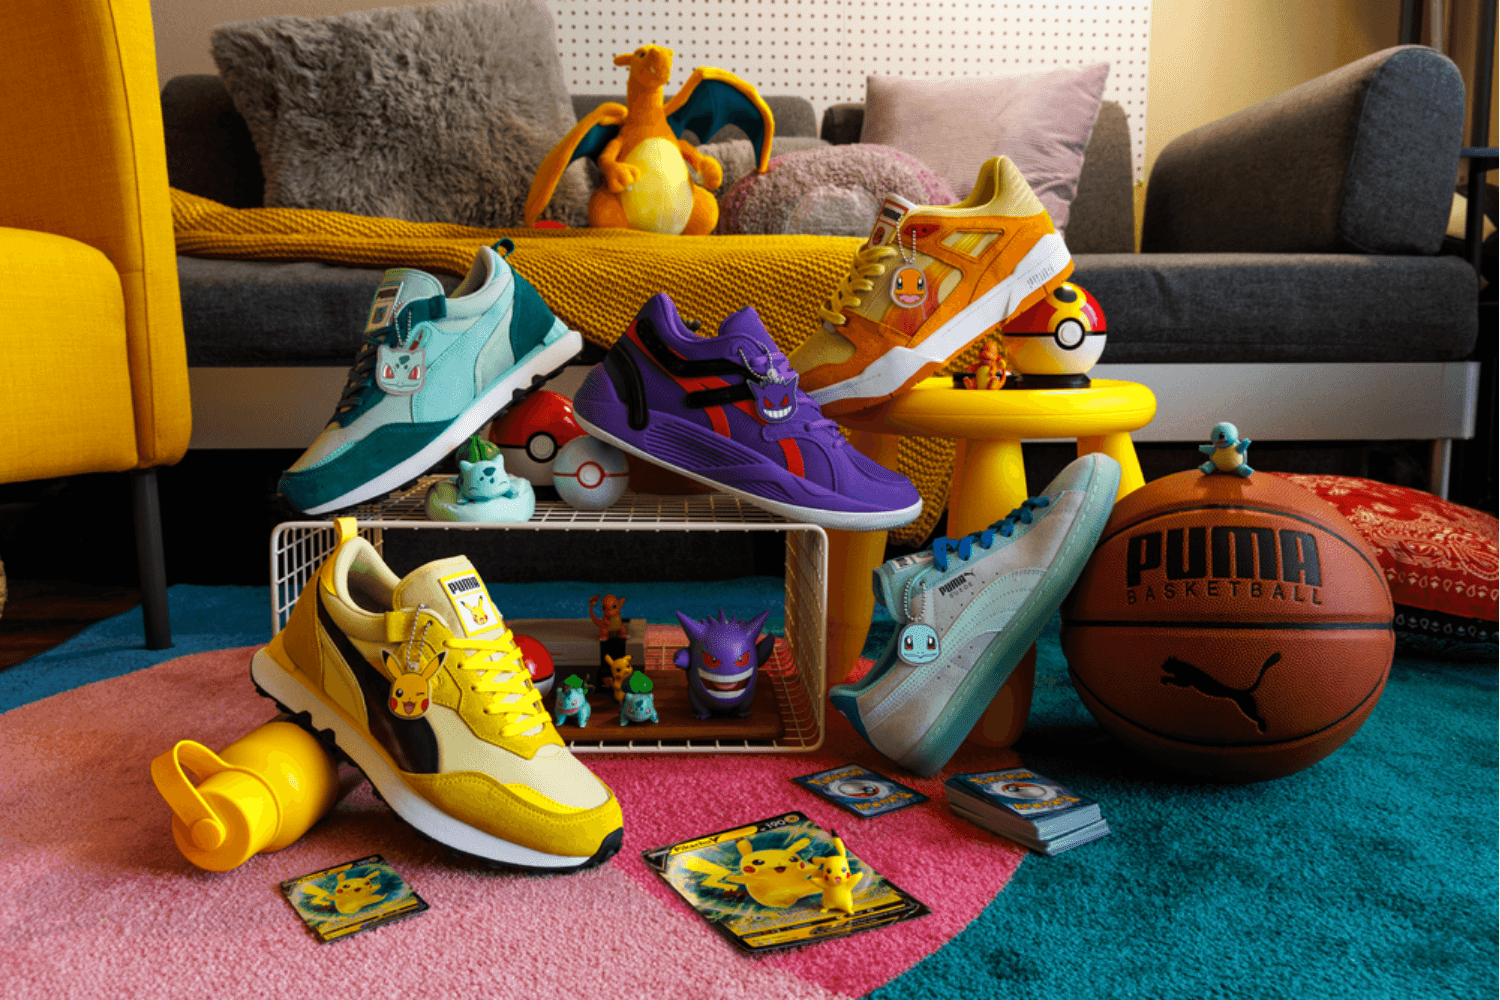 PUMA x Pokémon come up with 25th Anniversary collab